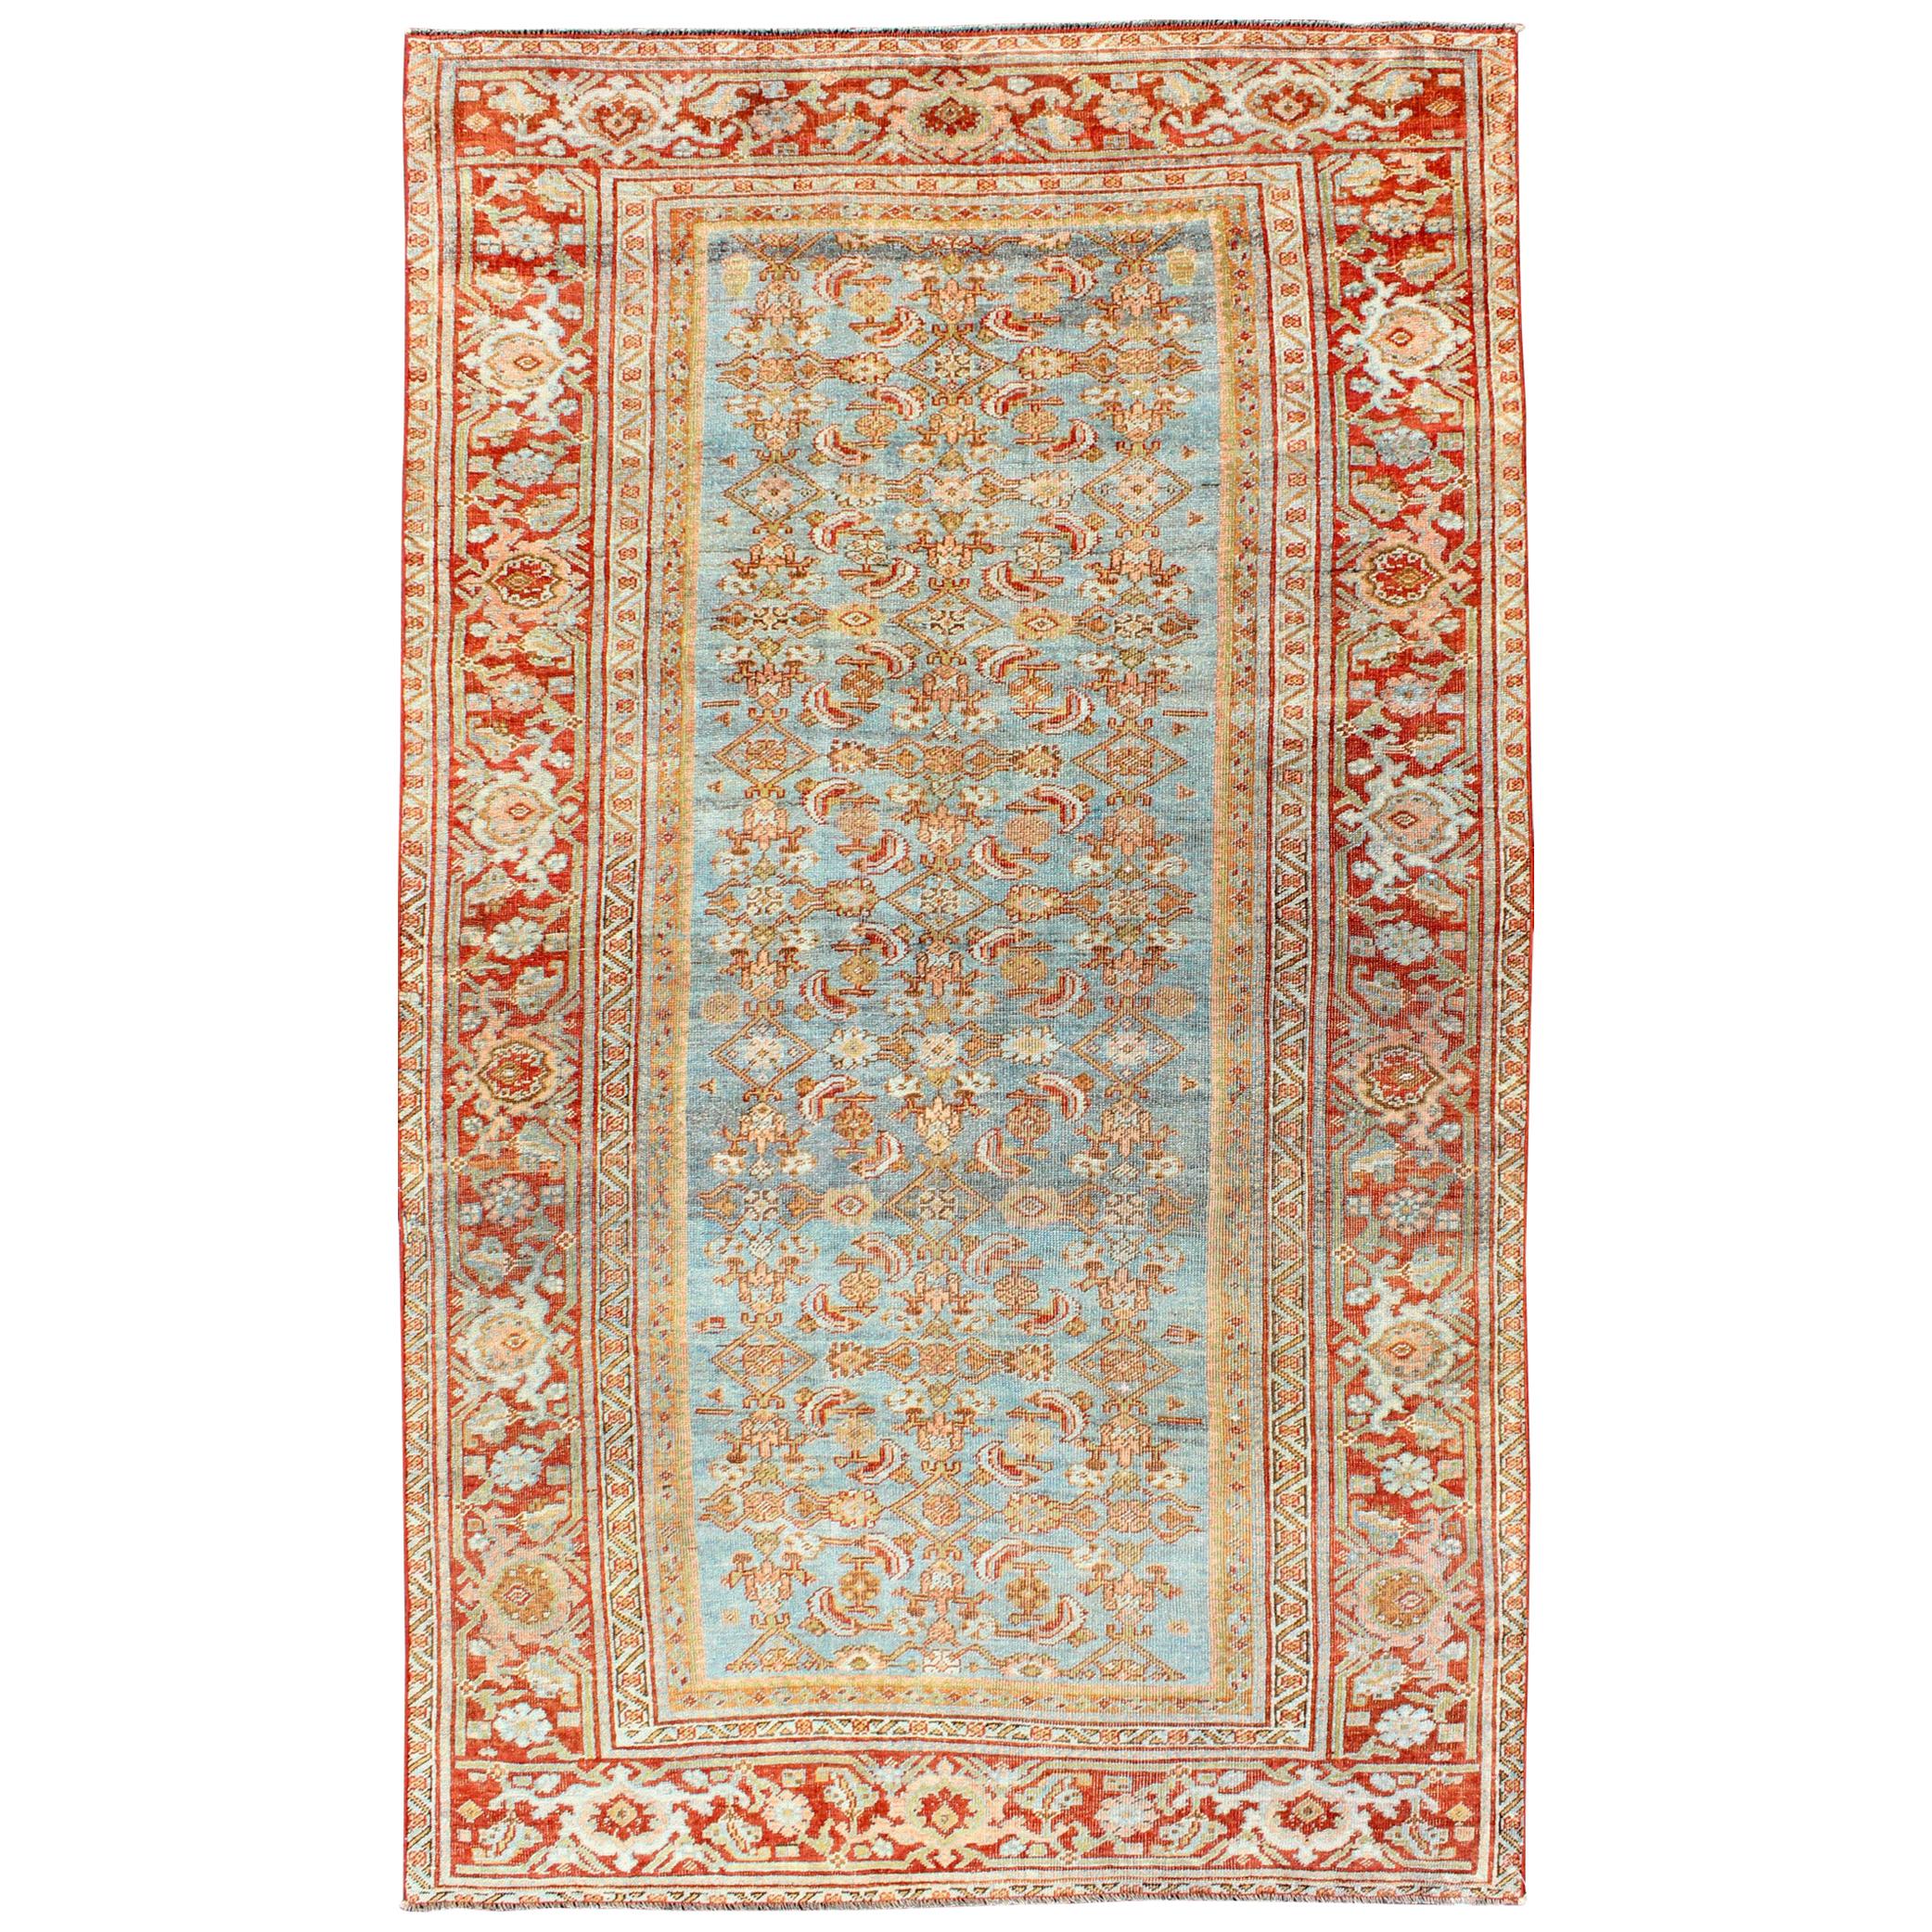 Antique Persian Bidjar Rug with Blossoming Floral Design in Light Blue and Red For Sale